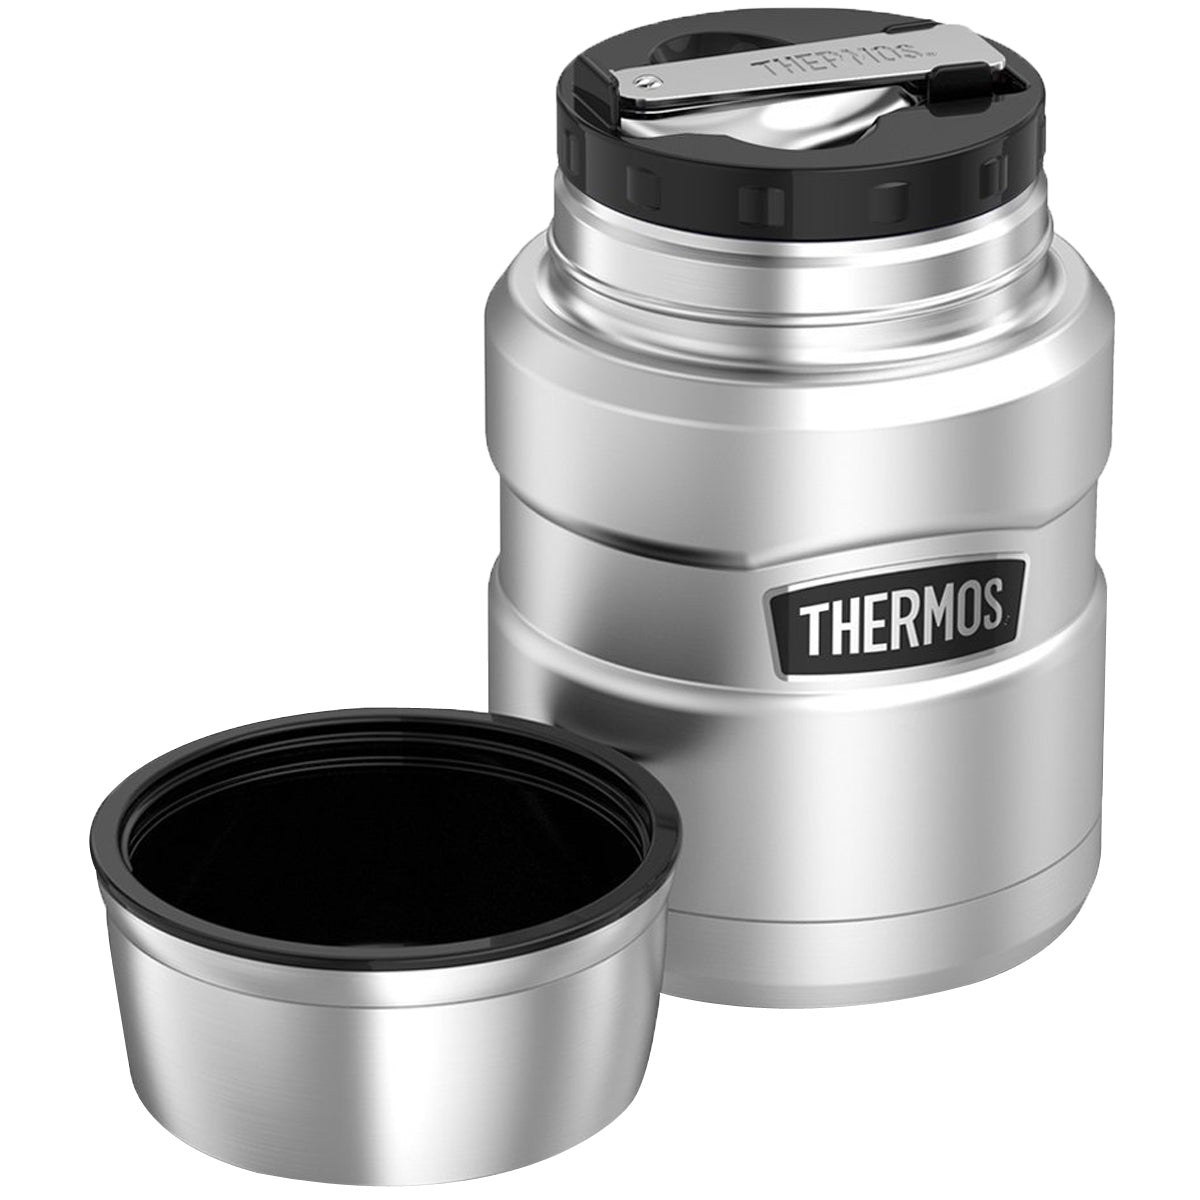 Thermos 16 oz Stainless King Vacuum Insulated Stainless Steel Food Jar Container Thermos